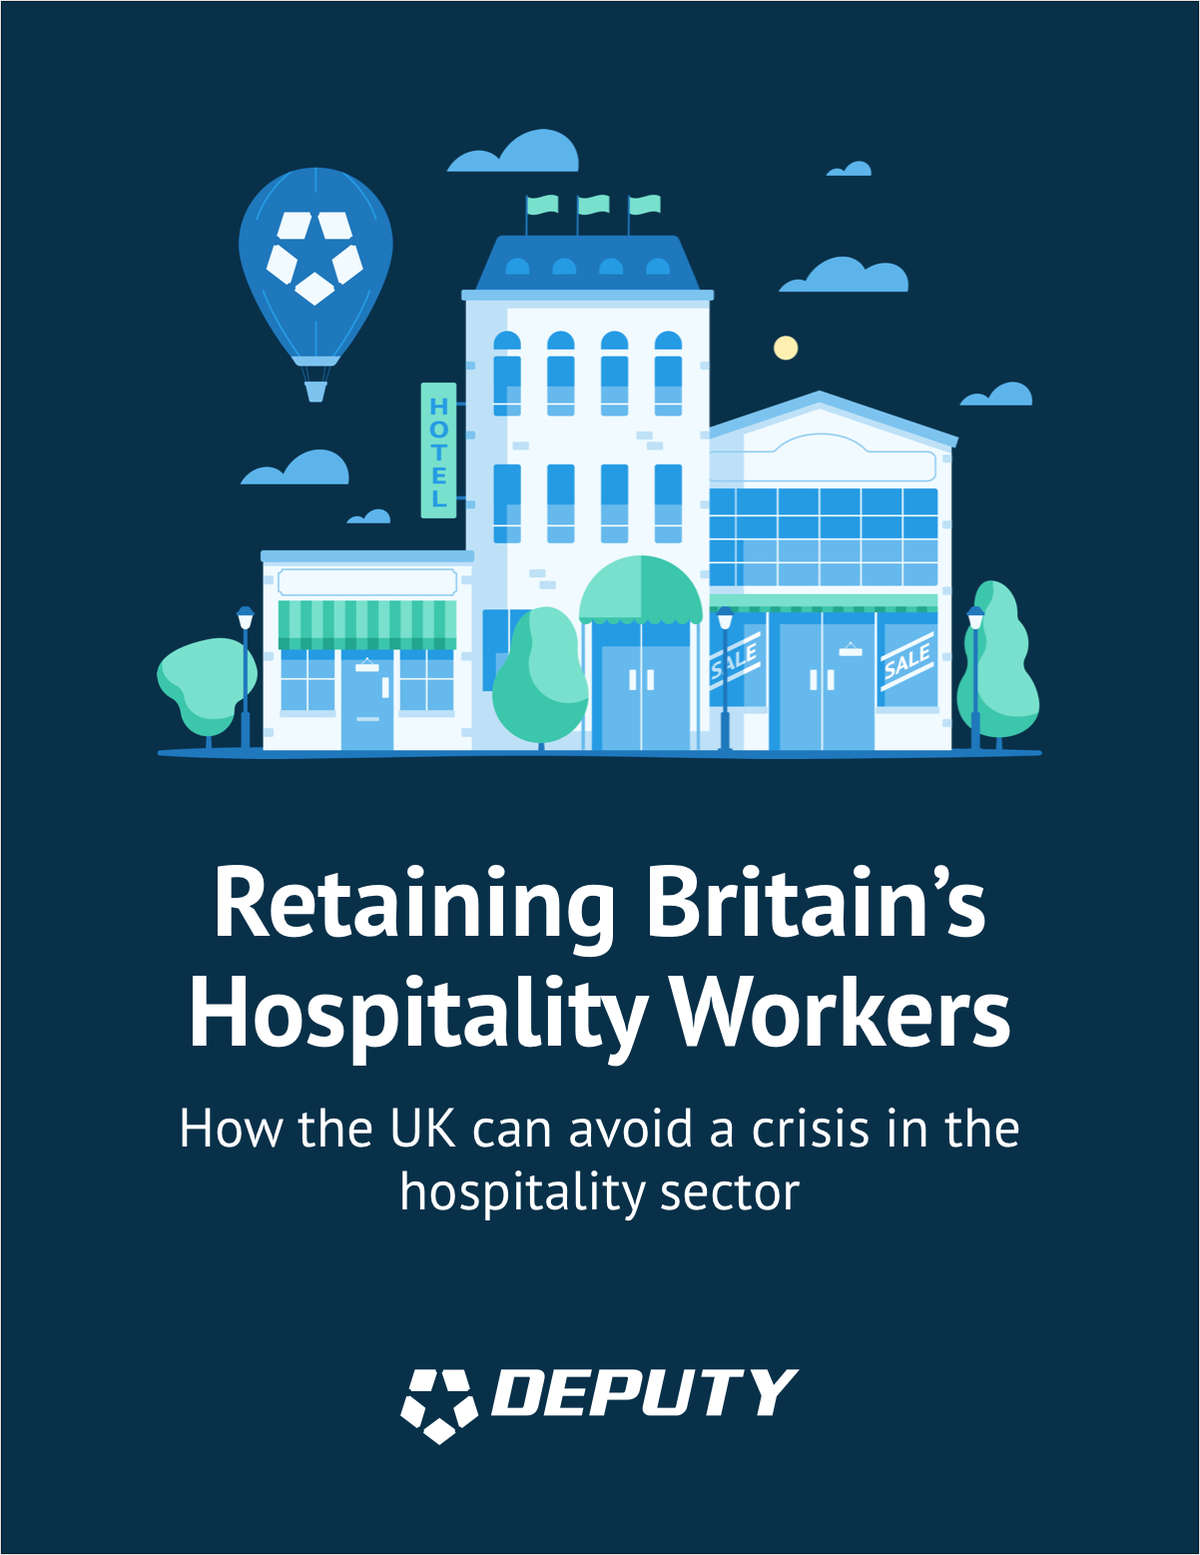 Retaining Britain's Hospitality Workers